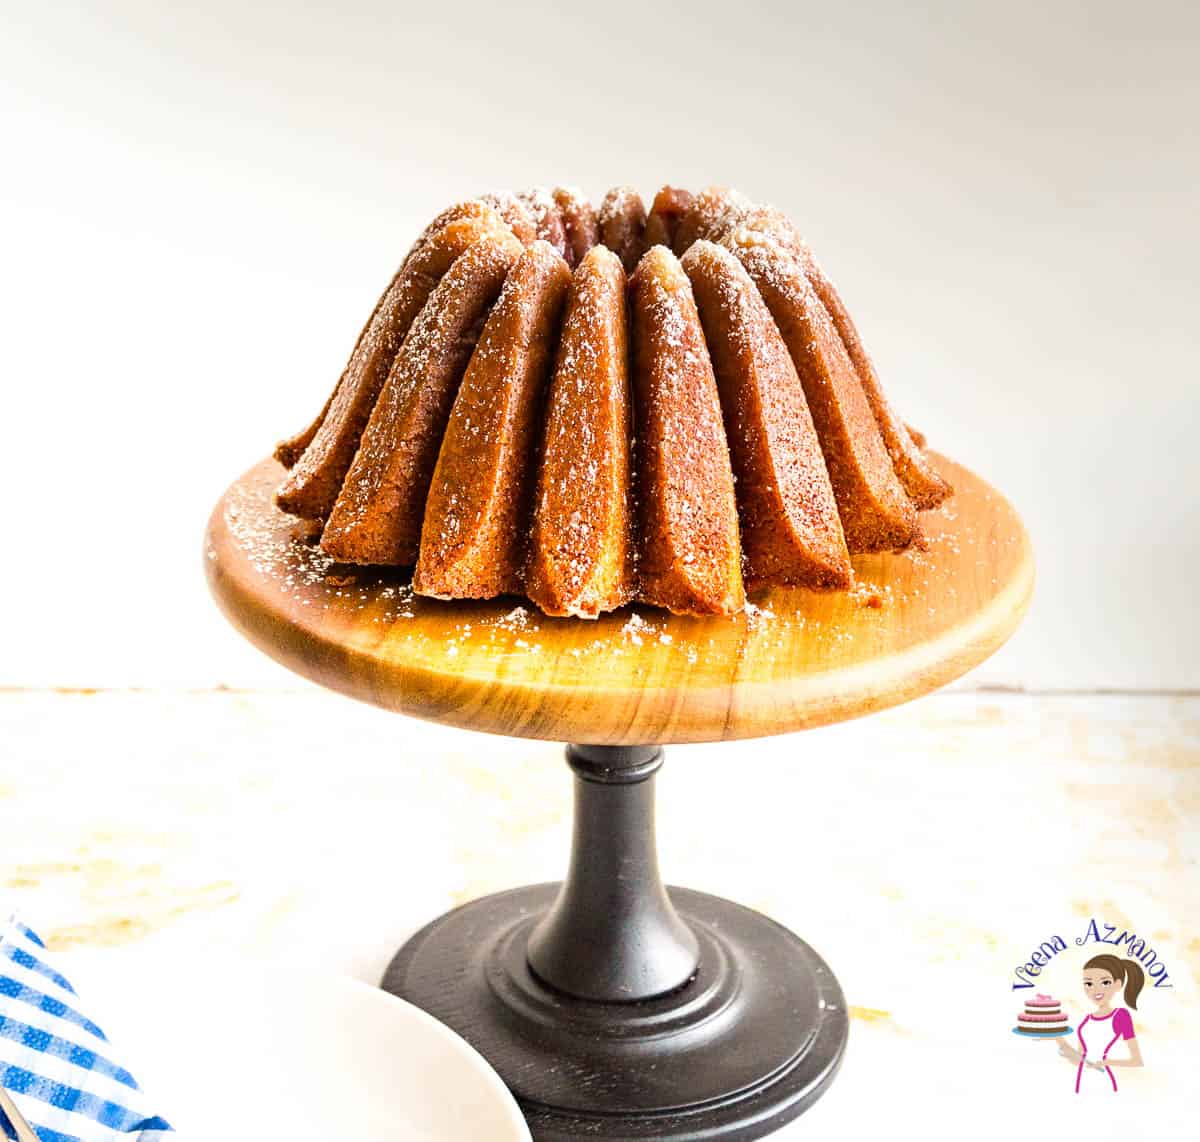 A bundt cake on a wooden cake stand